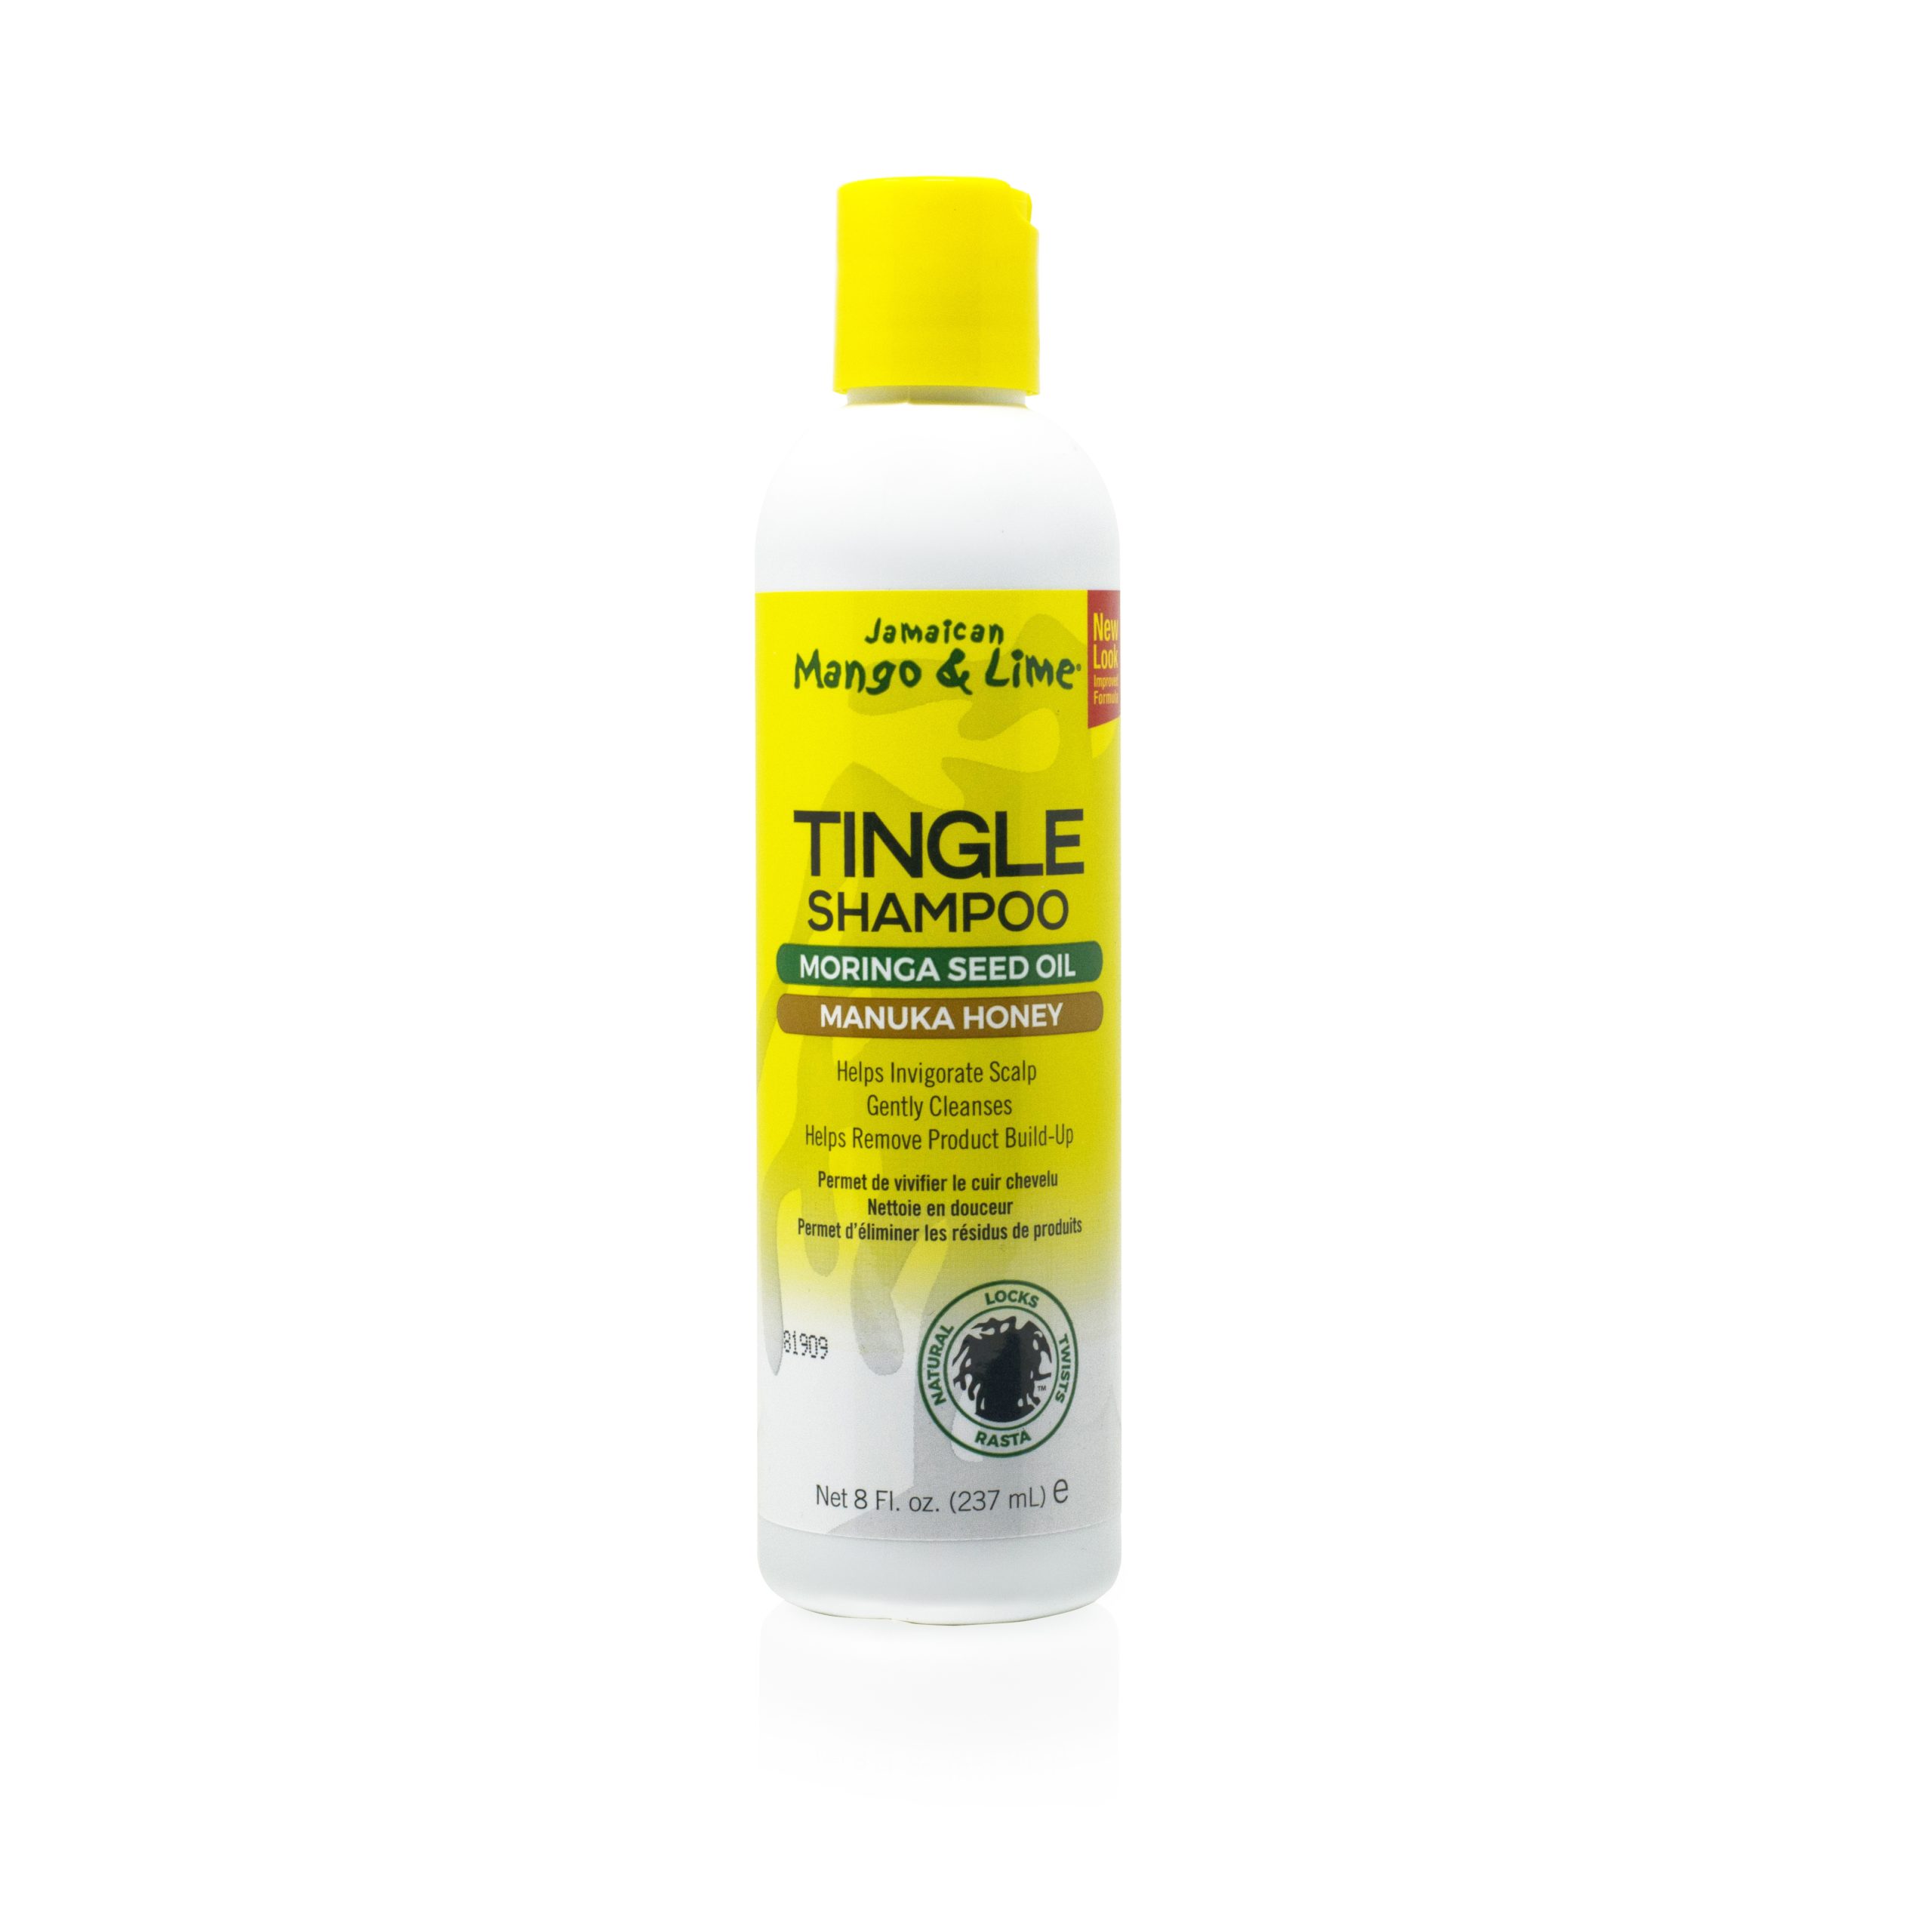 Armstrong Emuler Viva TINGLE SHAMPOO 8 oz - Non-Greasy formula helps prevent breakage. Great for  locks, twists and braids - Jamaican Mango & Lime